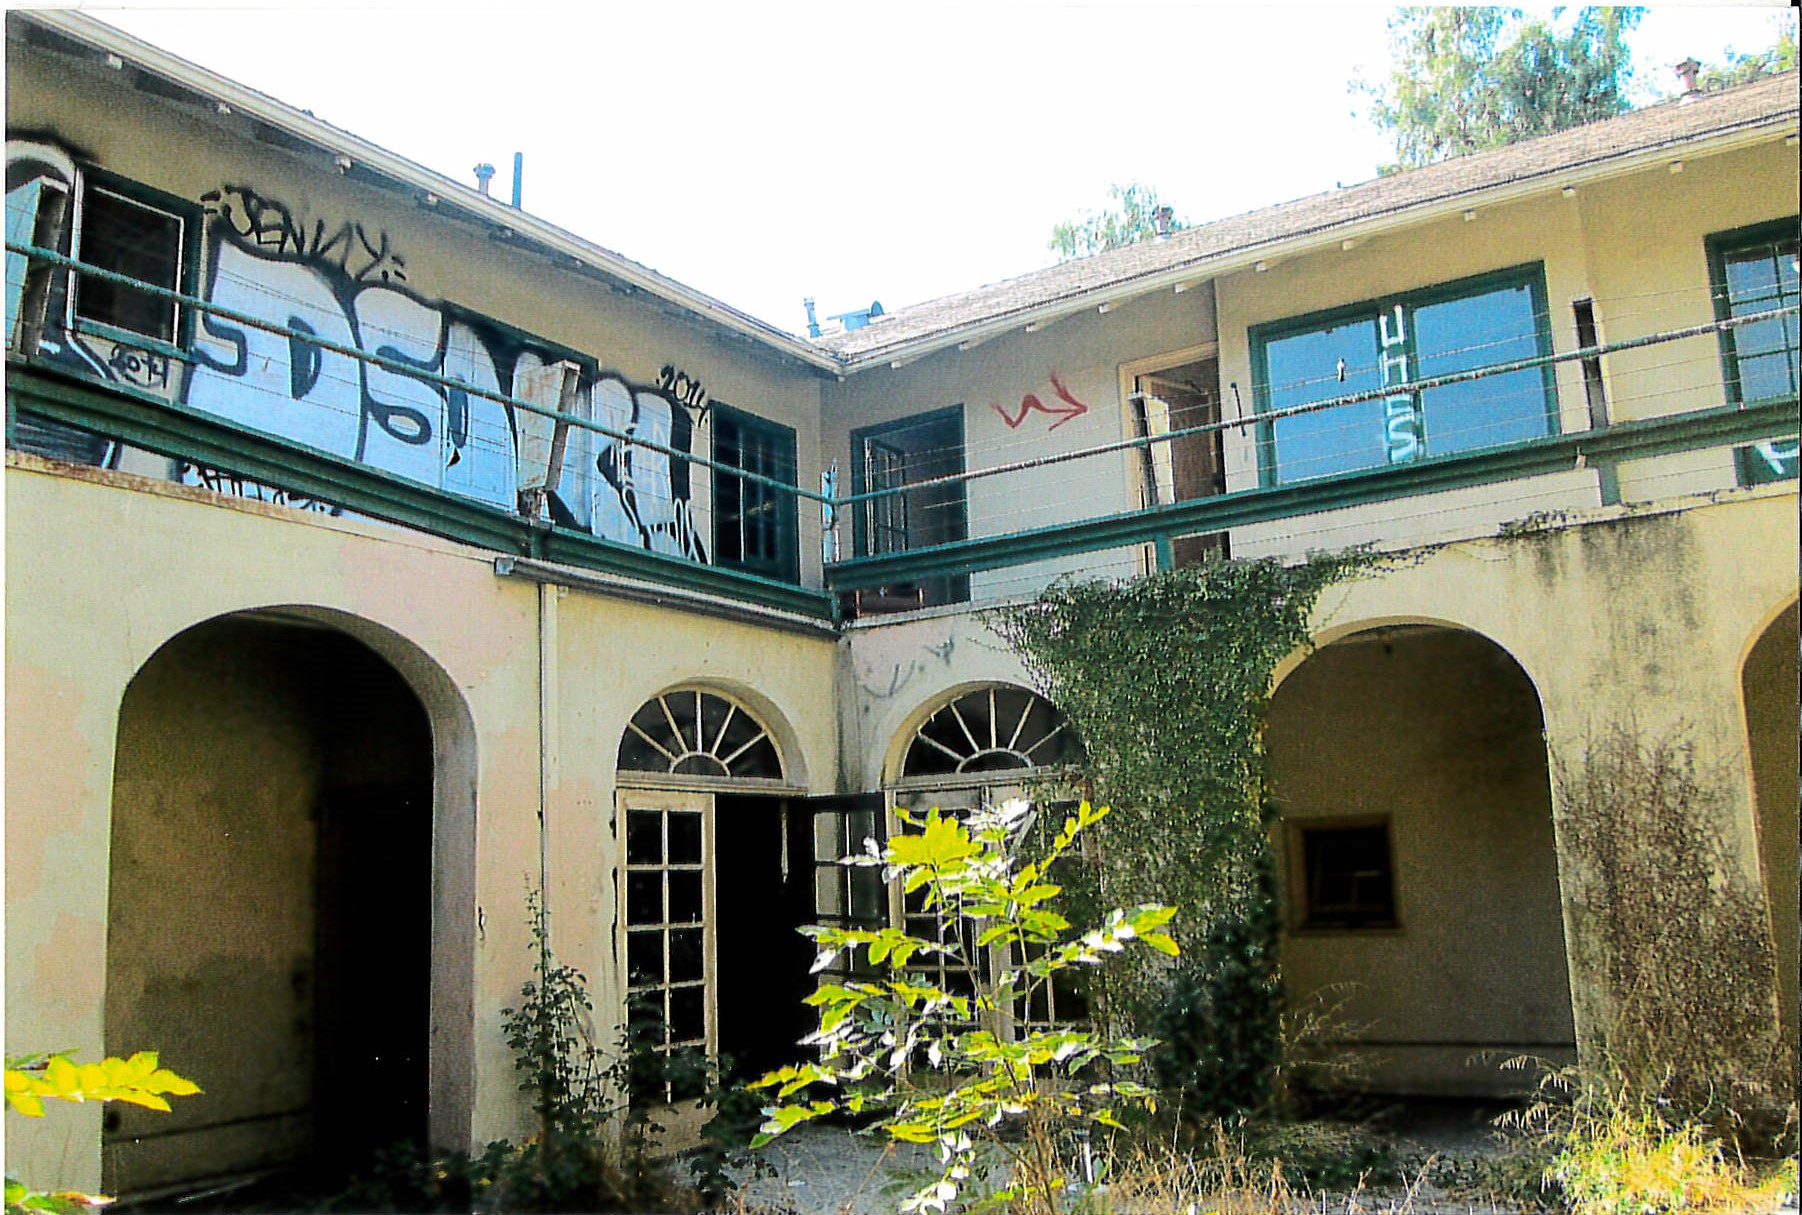 Overgrown and graffitied courtyard